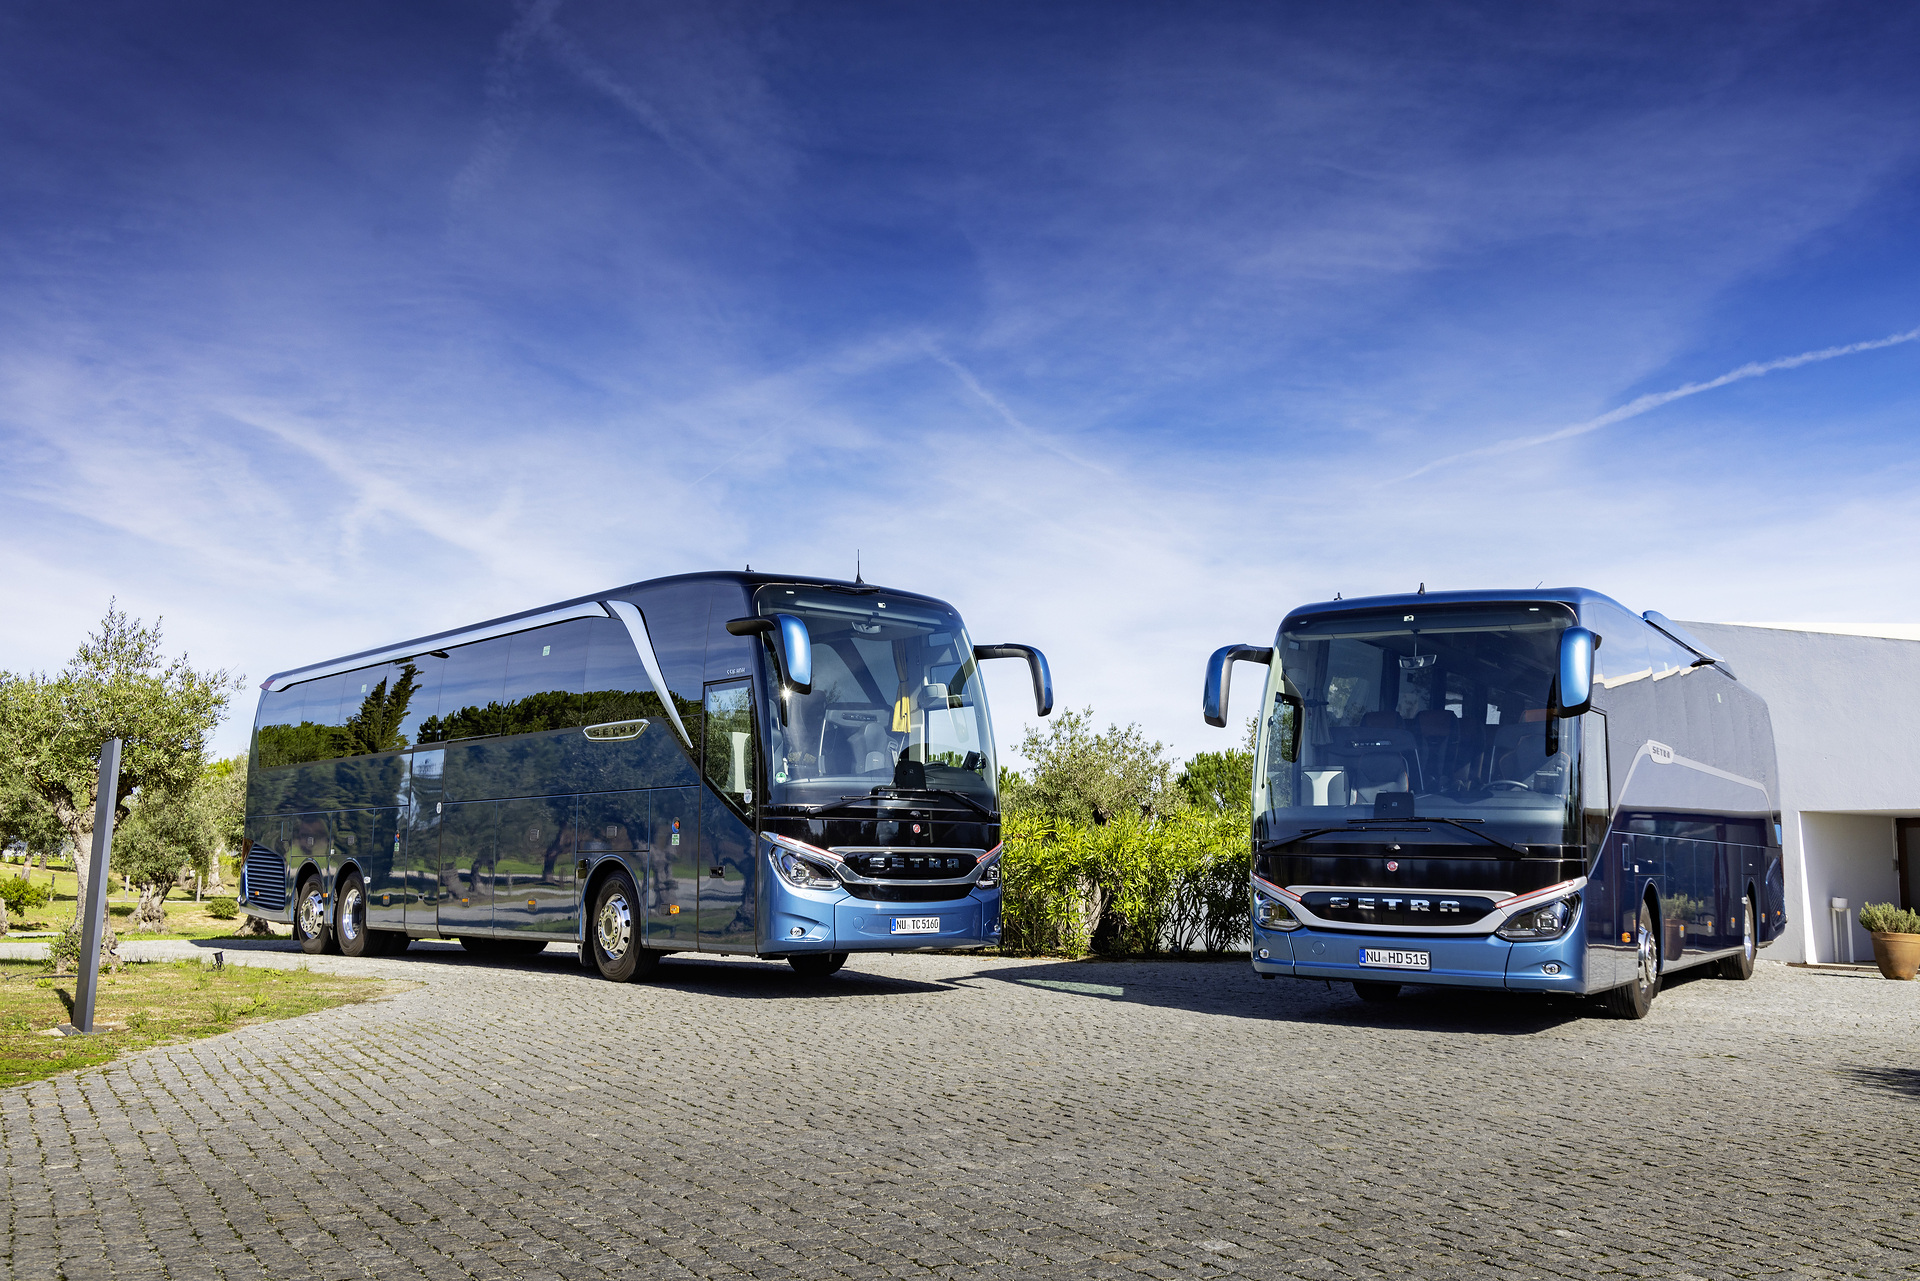 Management of Daimler Buses and General Works Council agree on target picture to ensure competitiveness and the German sites